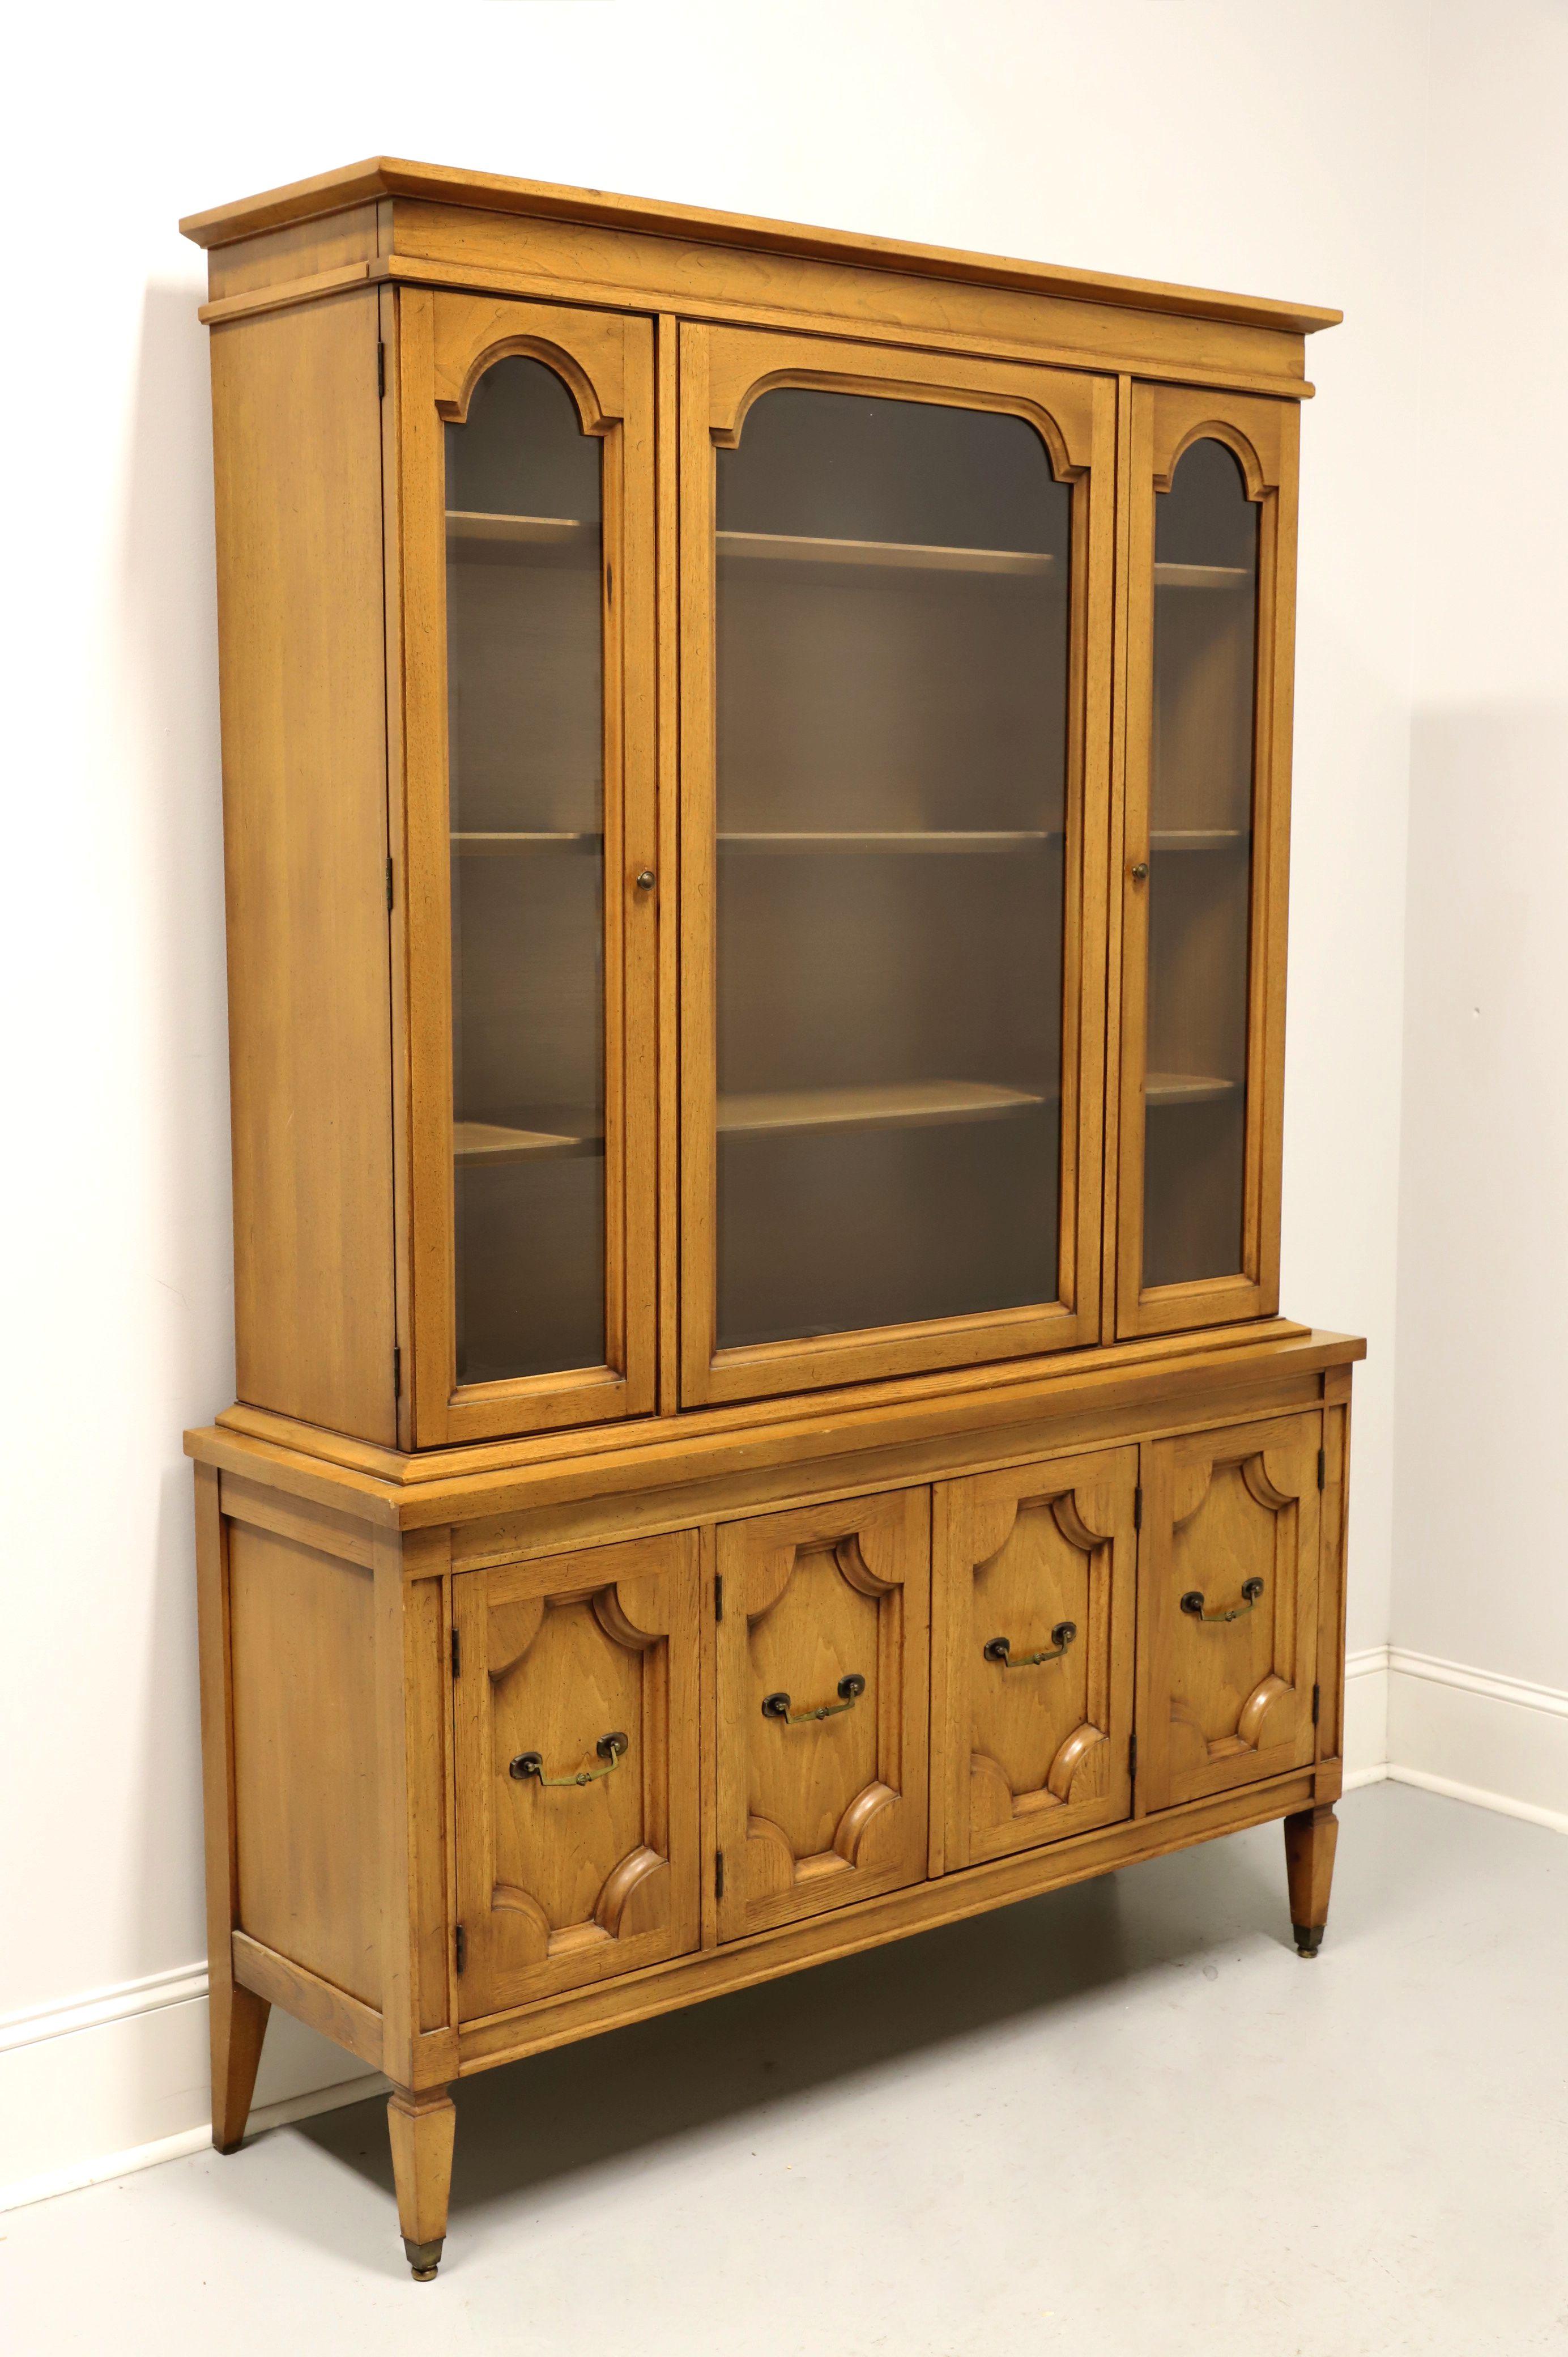 BASIC WITZ Mid 20th Century Pecan Mediterranean Style China Cabinet For Sale 6